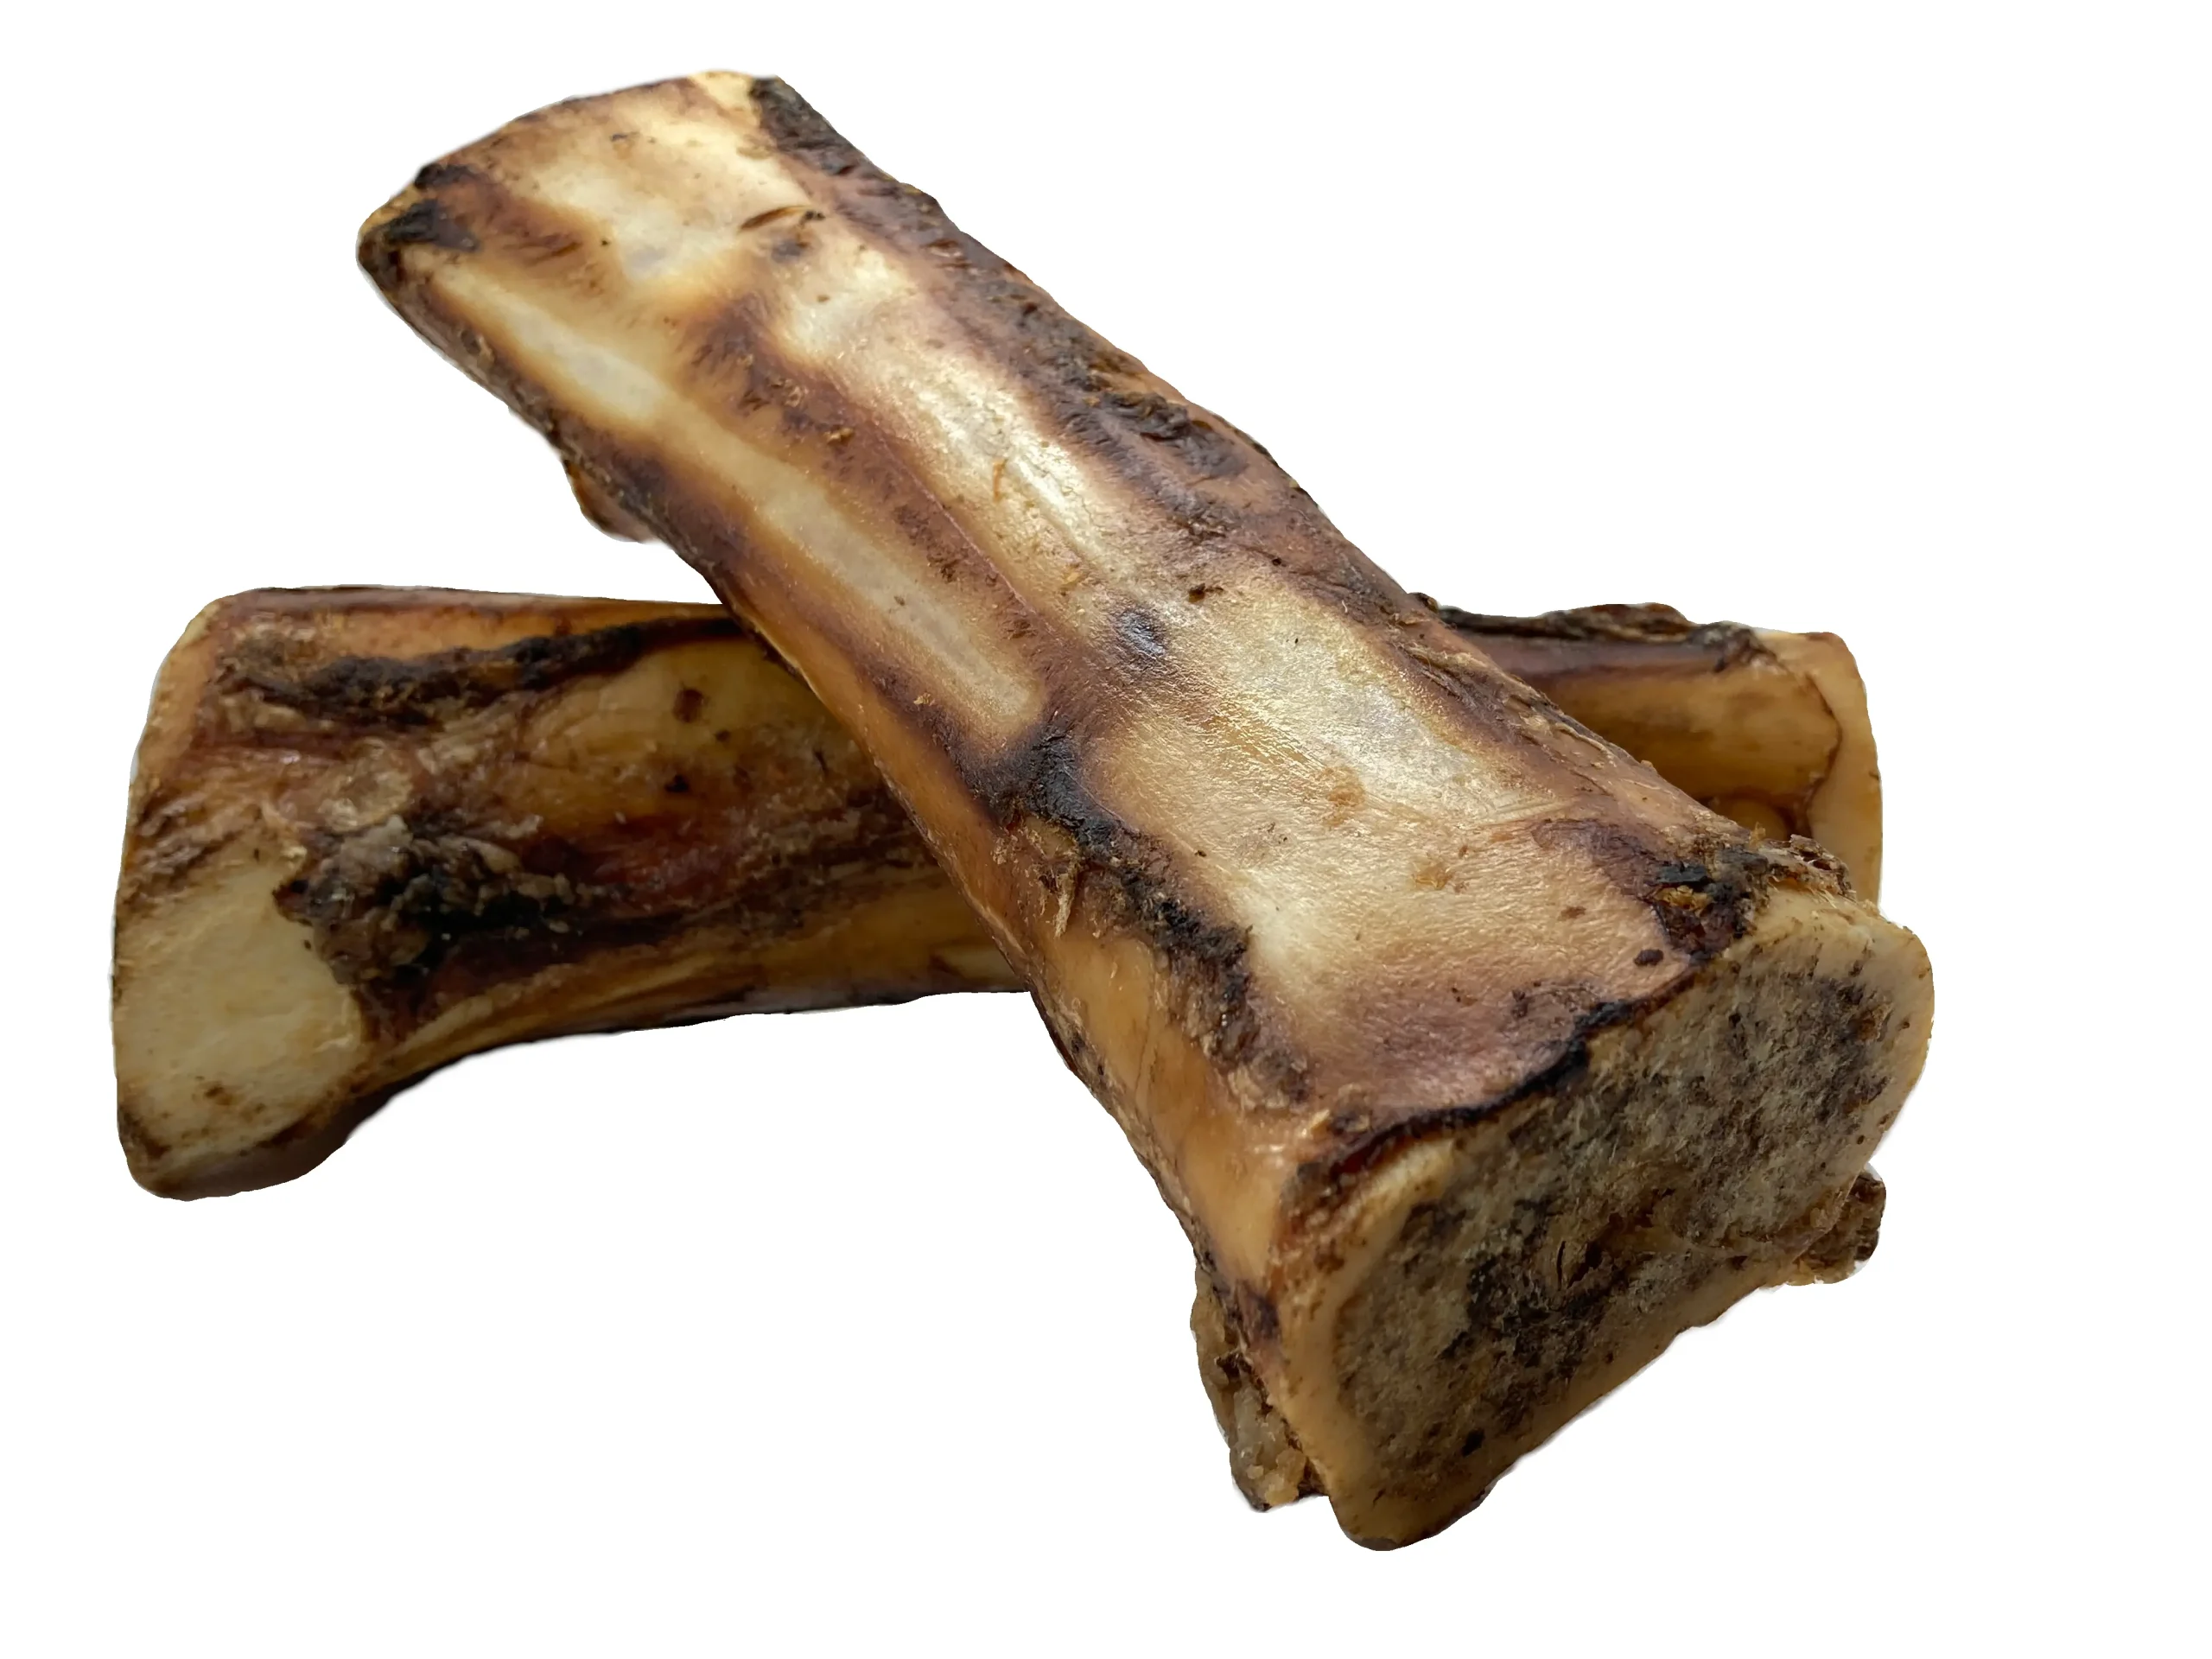 smoked beef marrow bones for dogs - Can dogs have roasted beef marrow bones